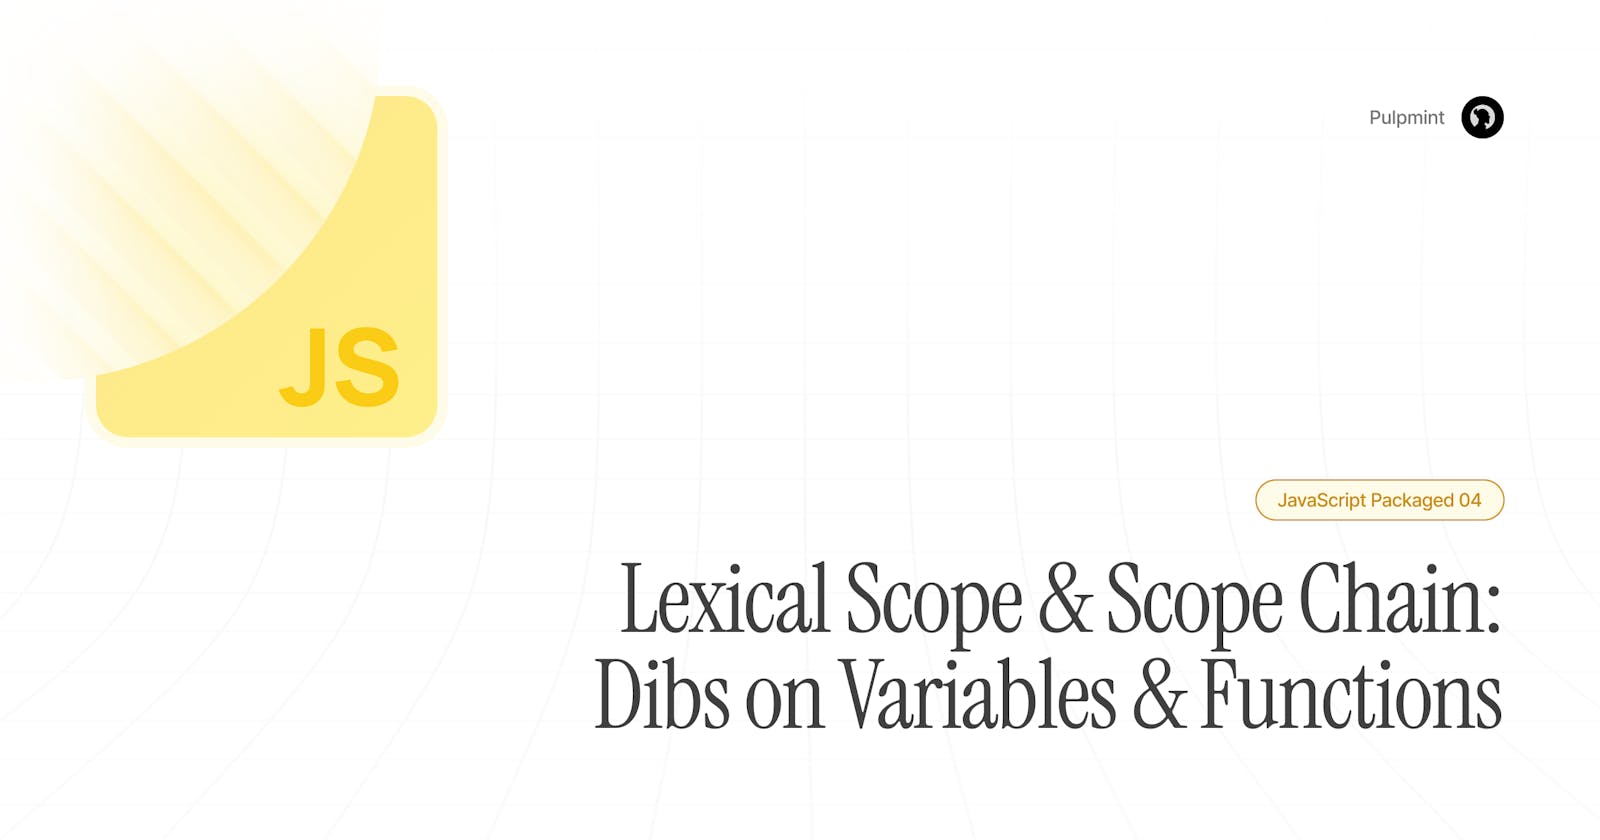 Lexical Scope & Scope Chain: Dibs on Variables & Functions